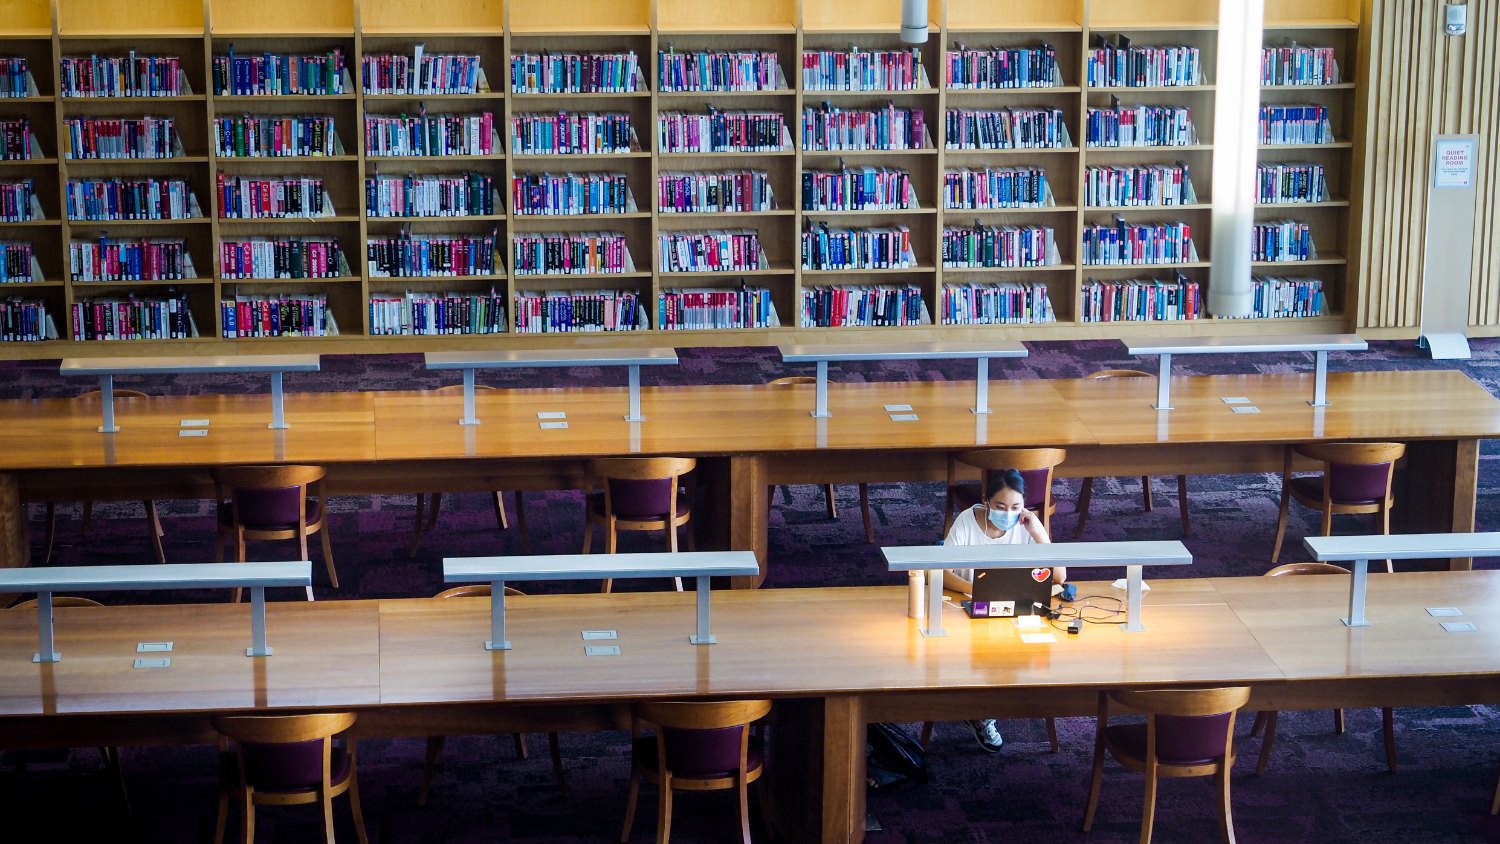 Students working at the Hunt Library on Centennial Campus find ample space to social distance, with undergraduate classes moved online for the remainder of the fall 2020 semester. Photo by Becky Kirkland.